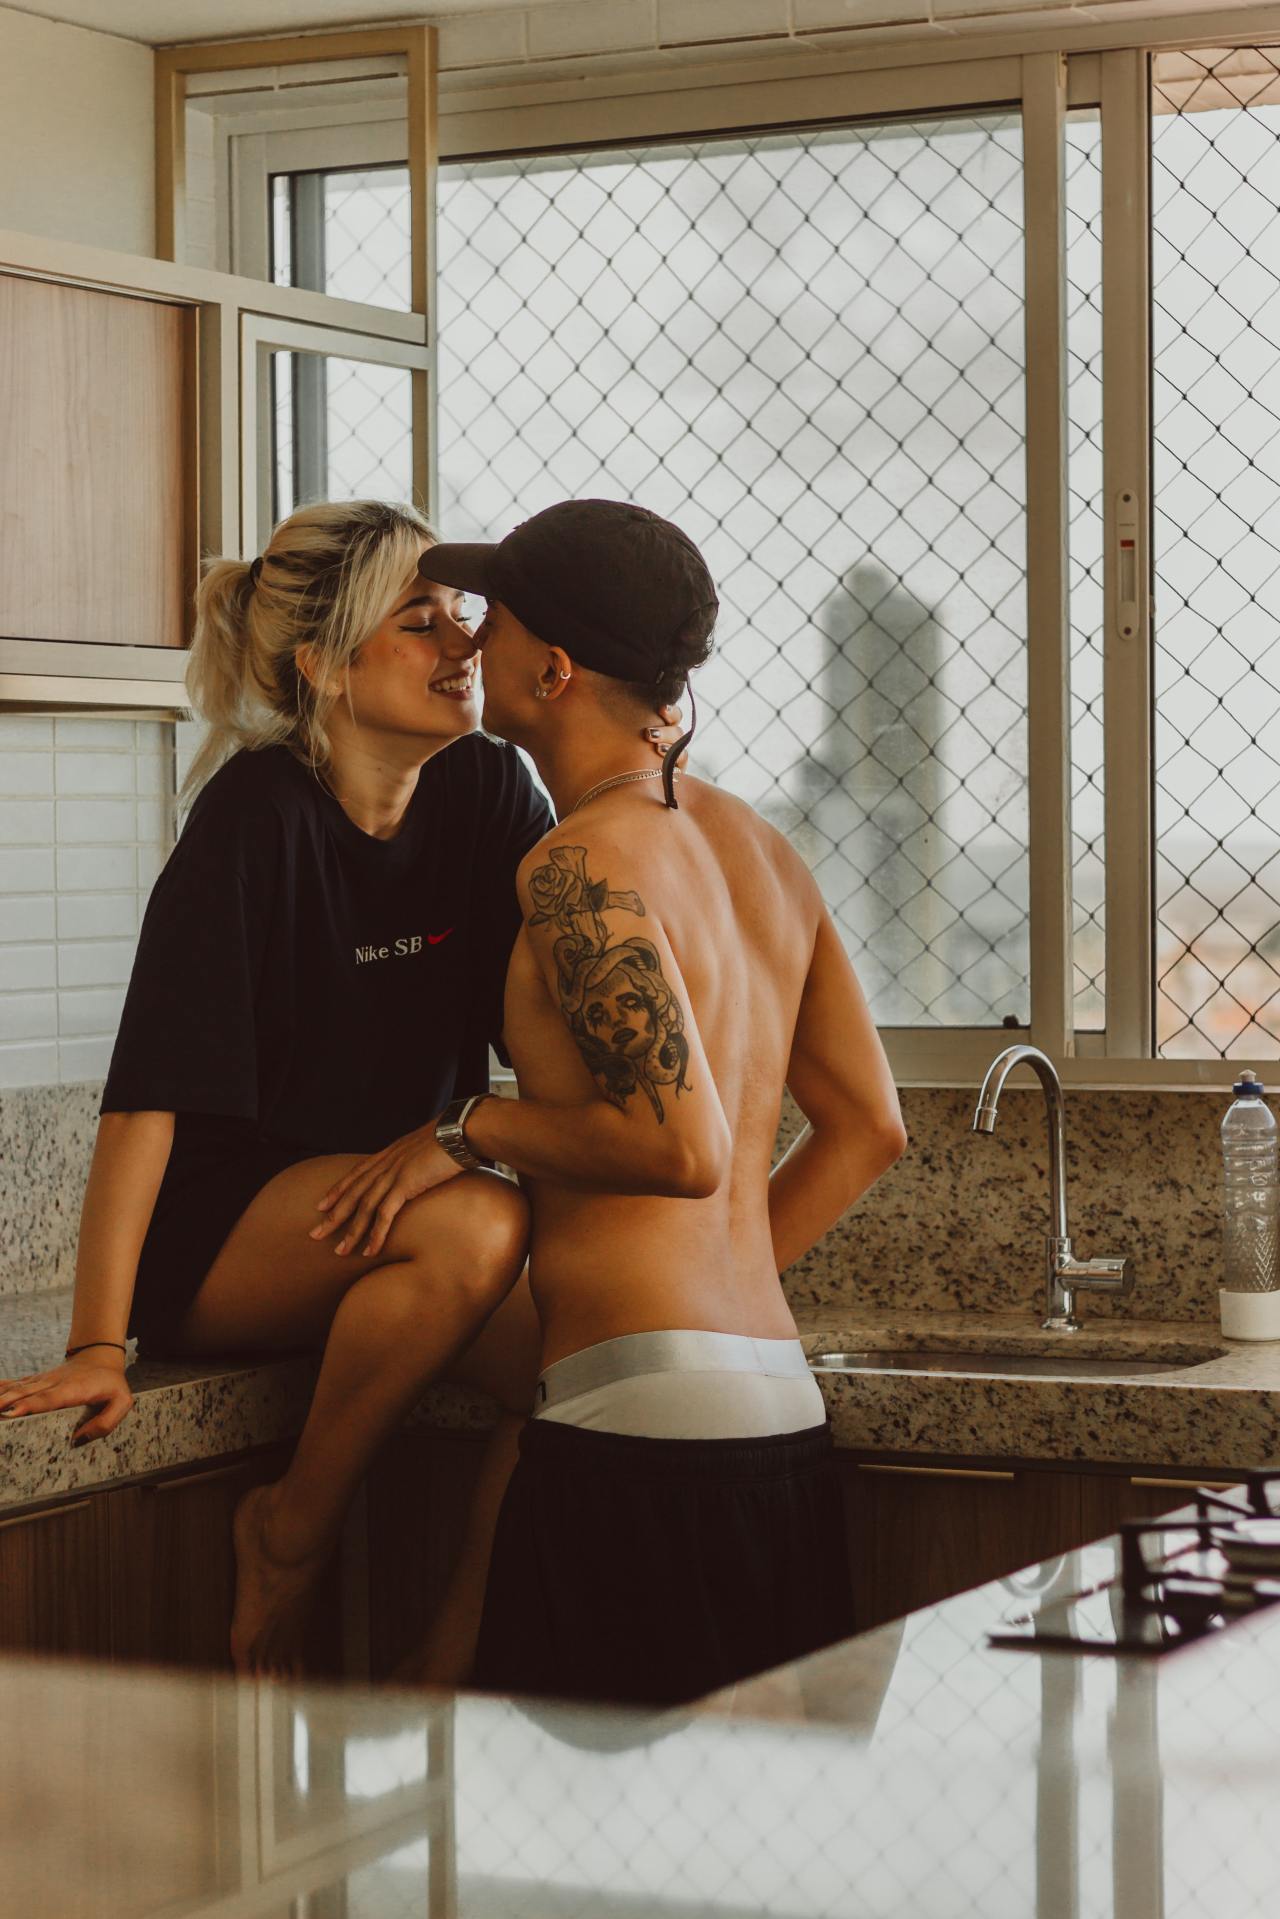 5 Signs You’re Giving Him Too Much Access To You